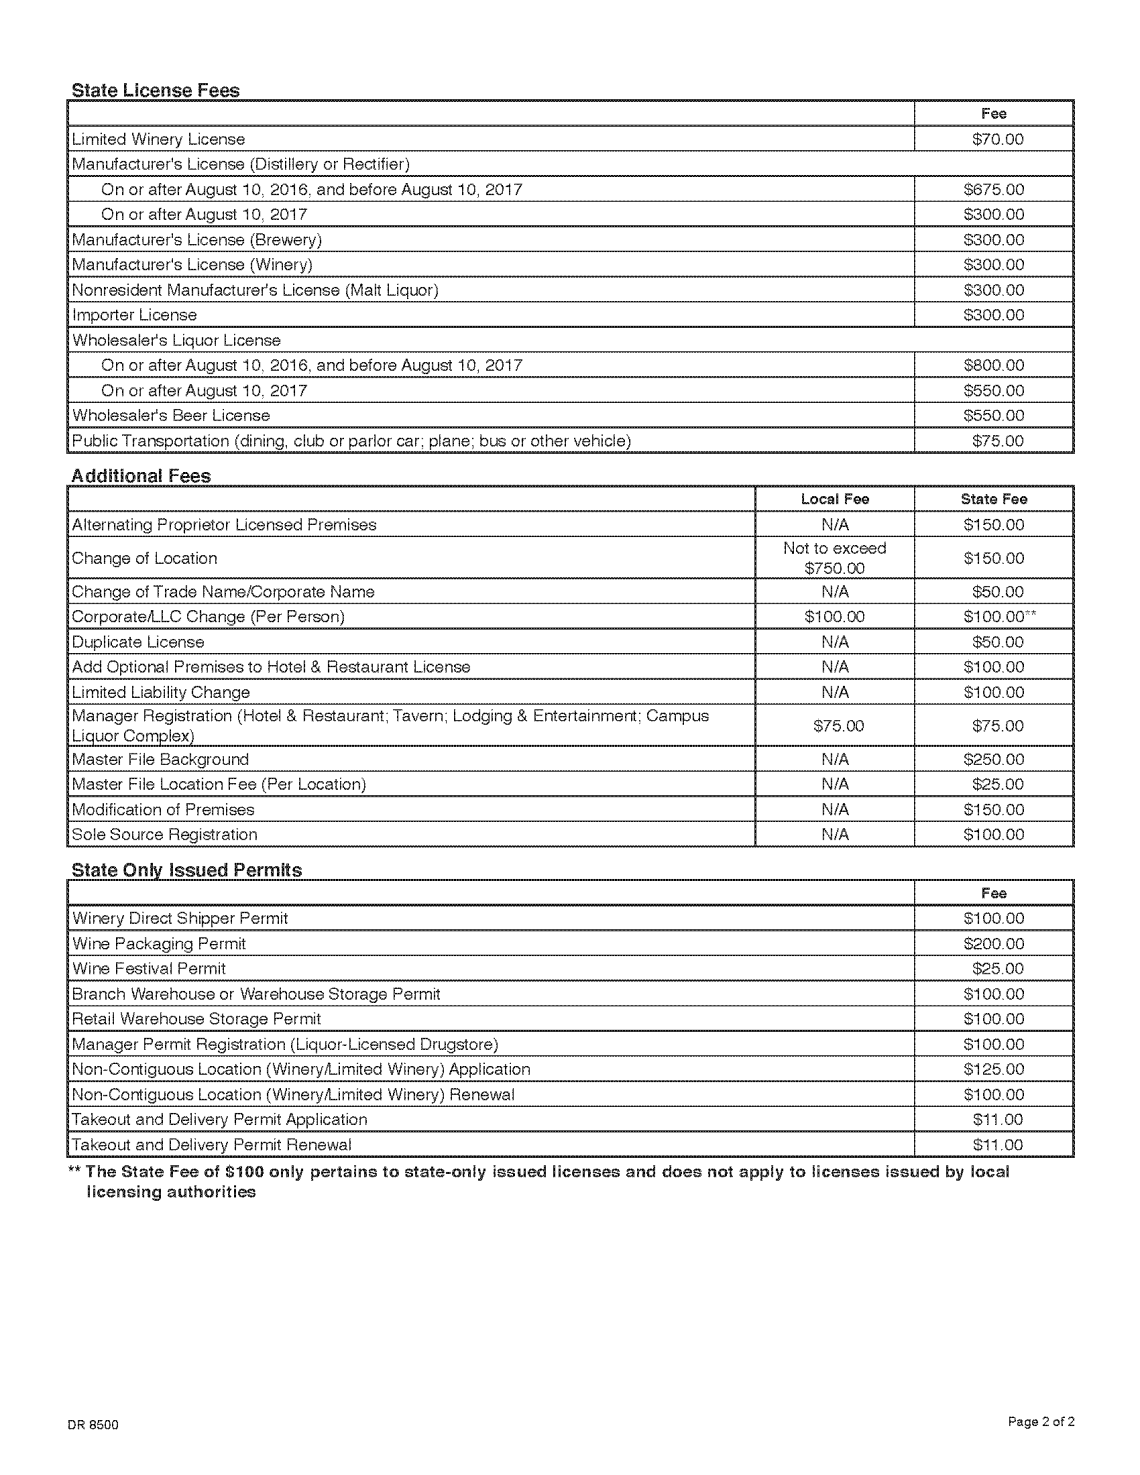 Liquor License Fee Schedule Page 2